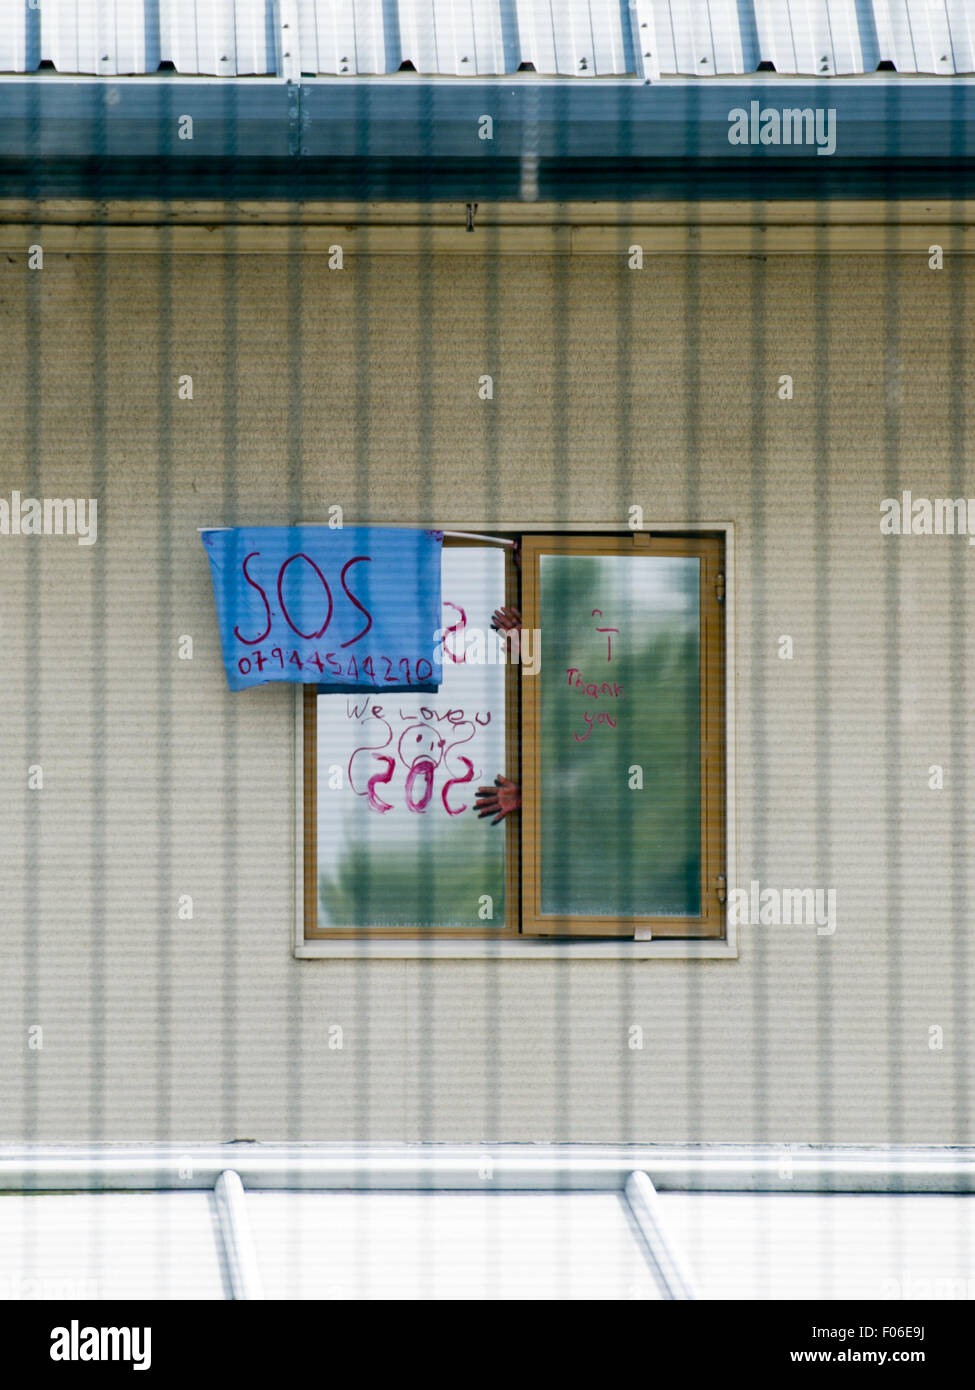 Bedfordshire, UK. 08 August, 2015. As the migrant crisis continues, hundreds of protesters gather behind Yarl's Wood Immigration Detention Centre calling for the facility to be shut down. Women detained inside awaiting deportation shouted slogans, waved banners and clothes from their cell windows. Stock Photo